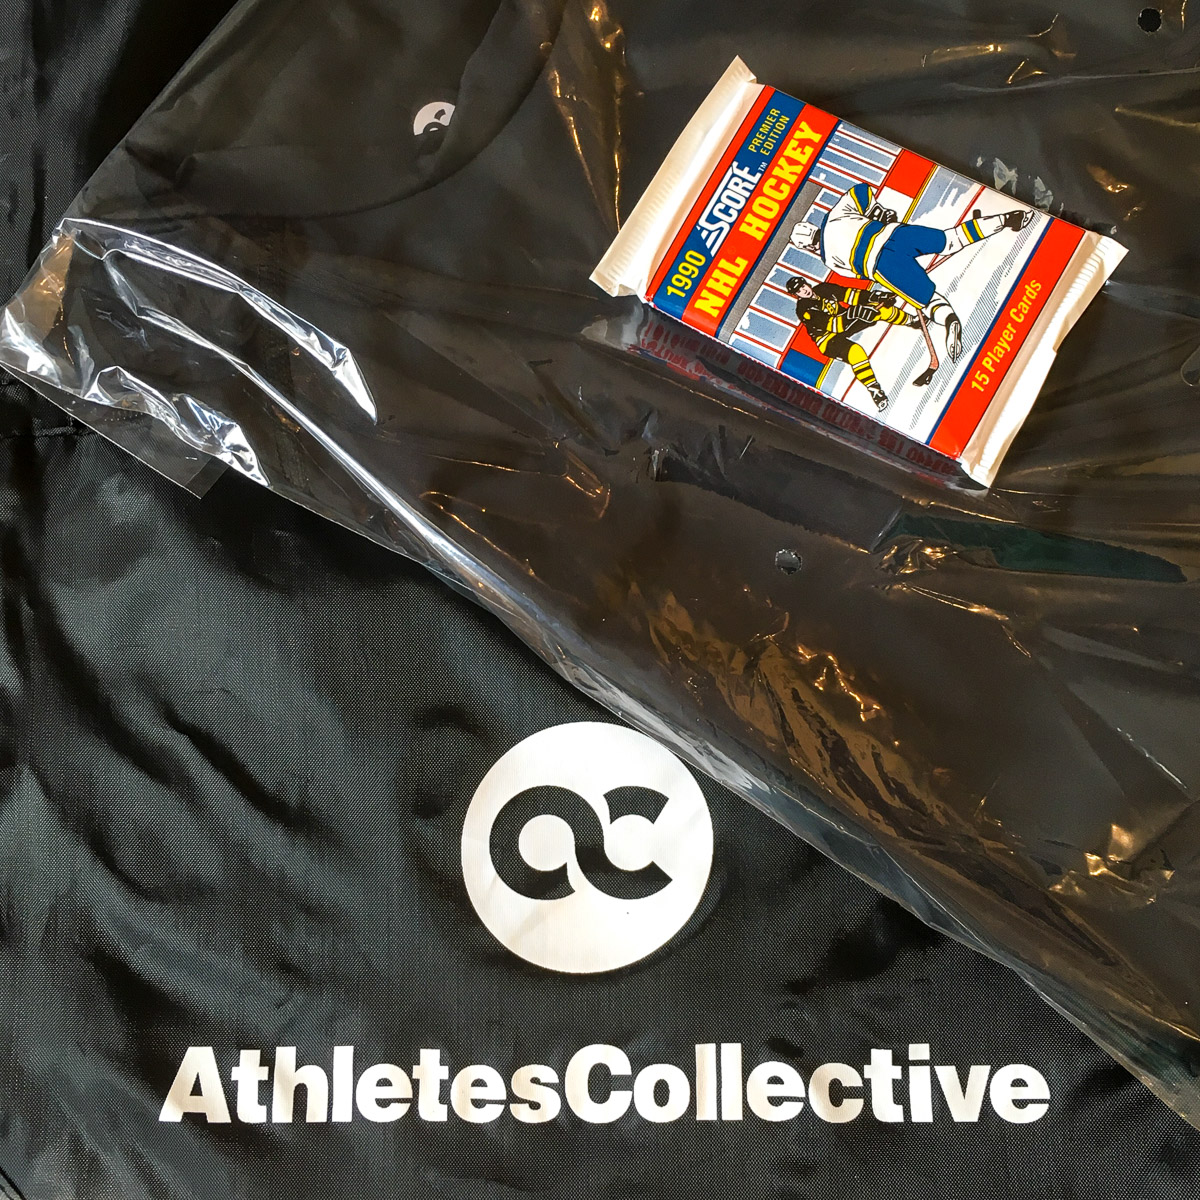 The "welcome package" includes an Athletes Collective bag and a pack of throwback hockey cards. Our package featured a Chris Draper rookie card.